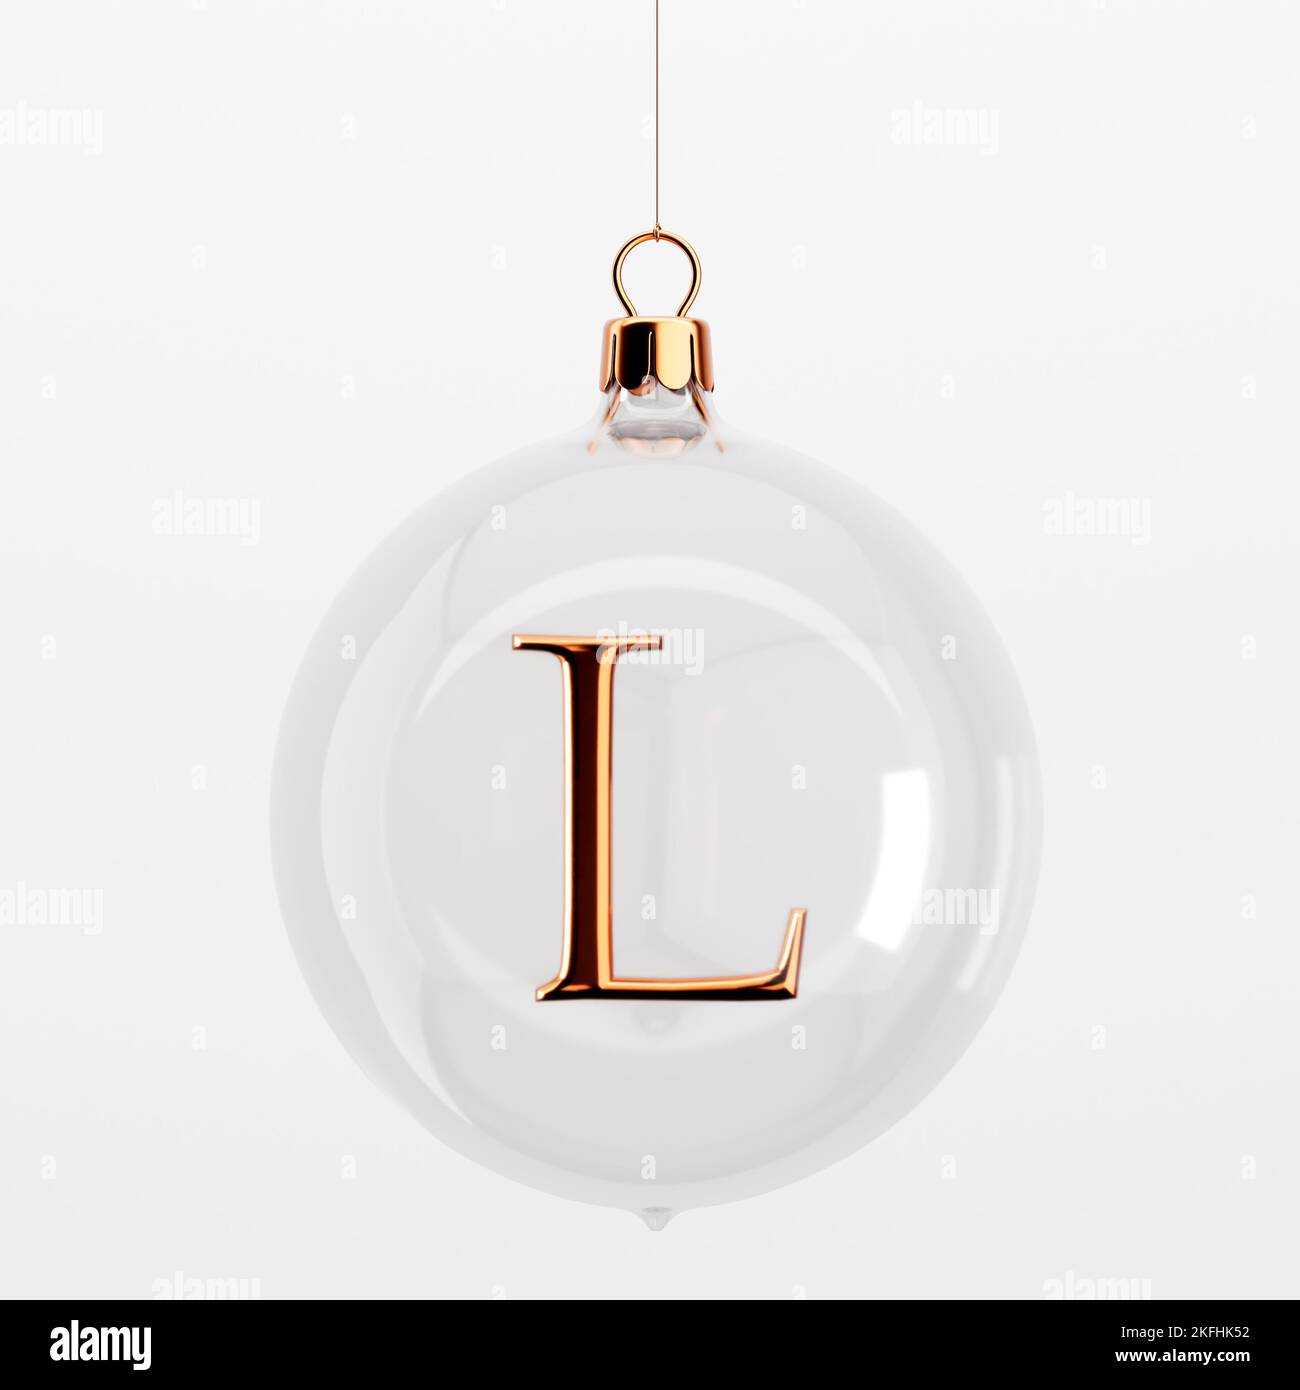 https://c8.alamy.com/comp/2KFHK52/glass-festive-christmas-hanging-baubles-with-gold-letter-l-3d-rendering-2KFHK52.jpg